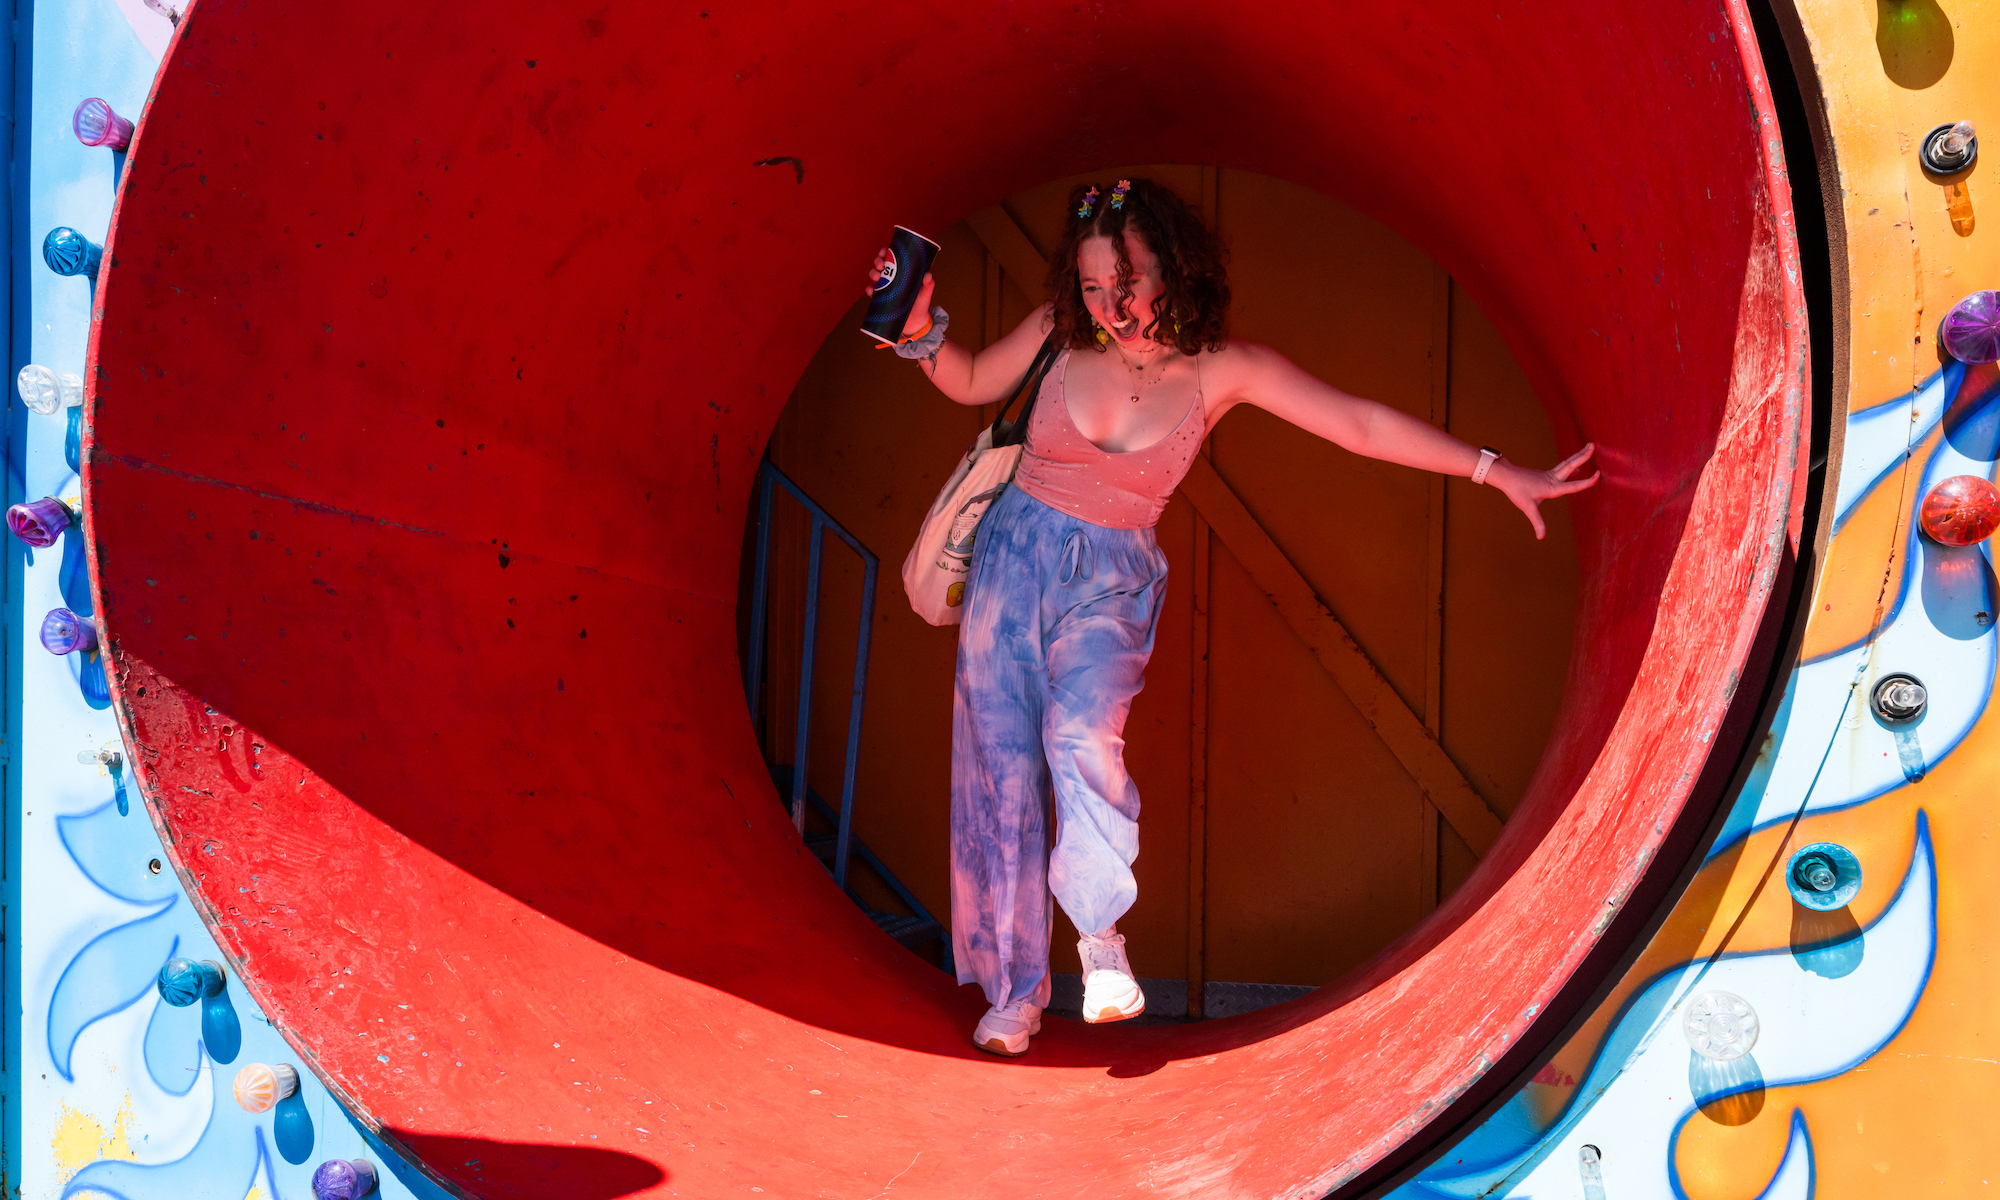 student emerges from rotating cylinder as part of a fun house